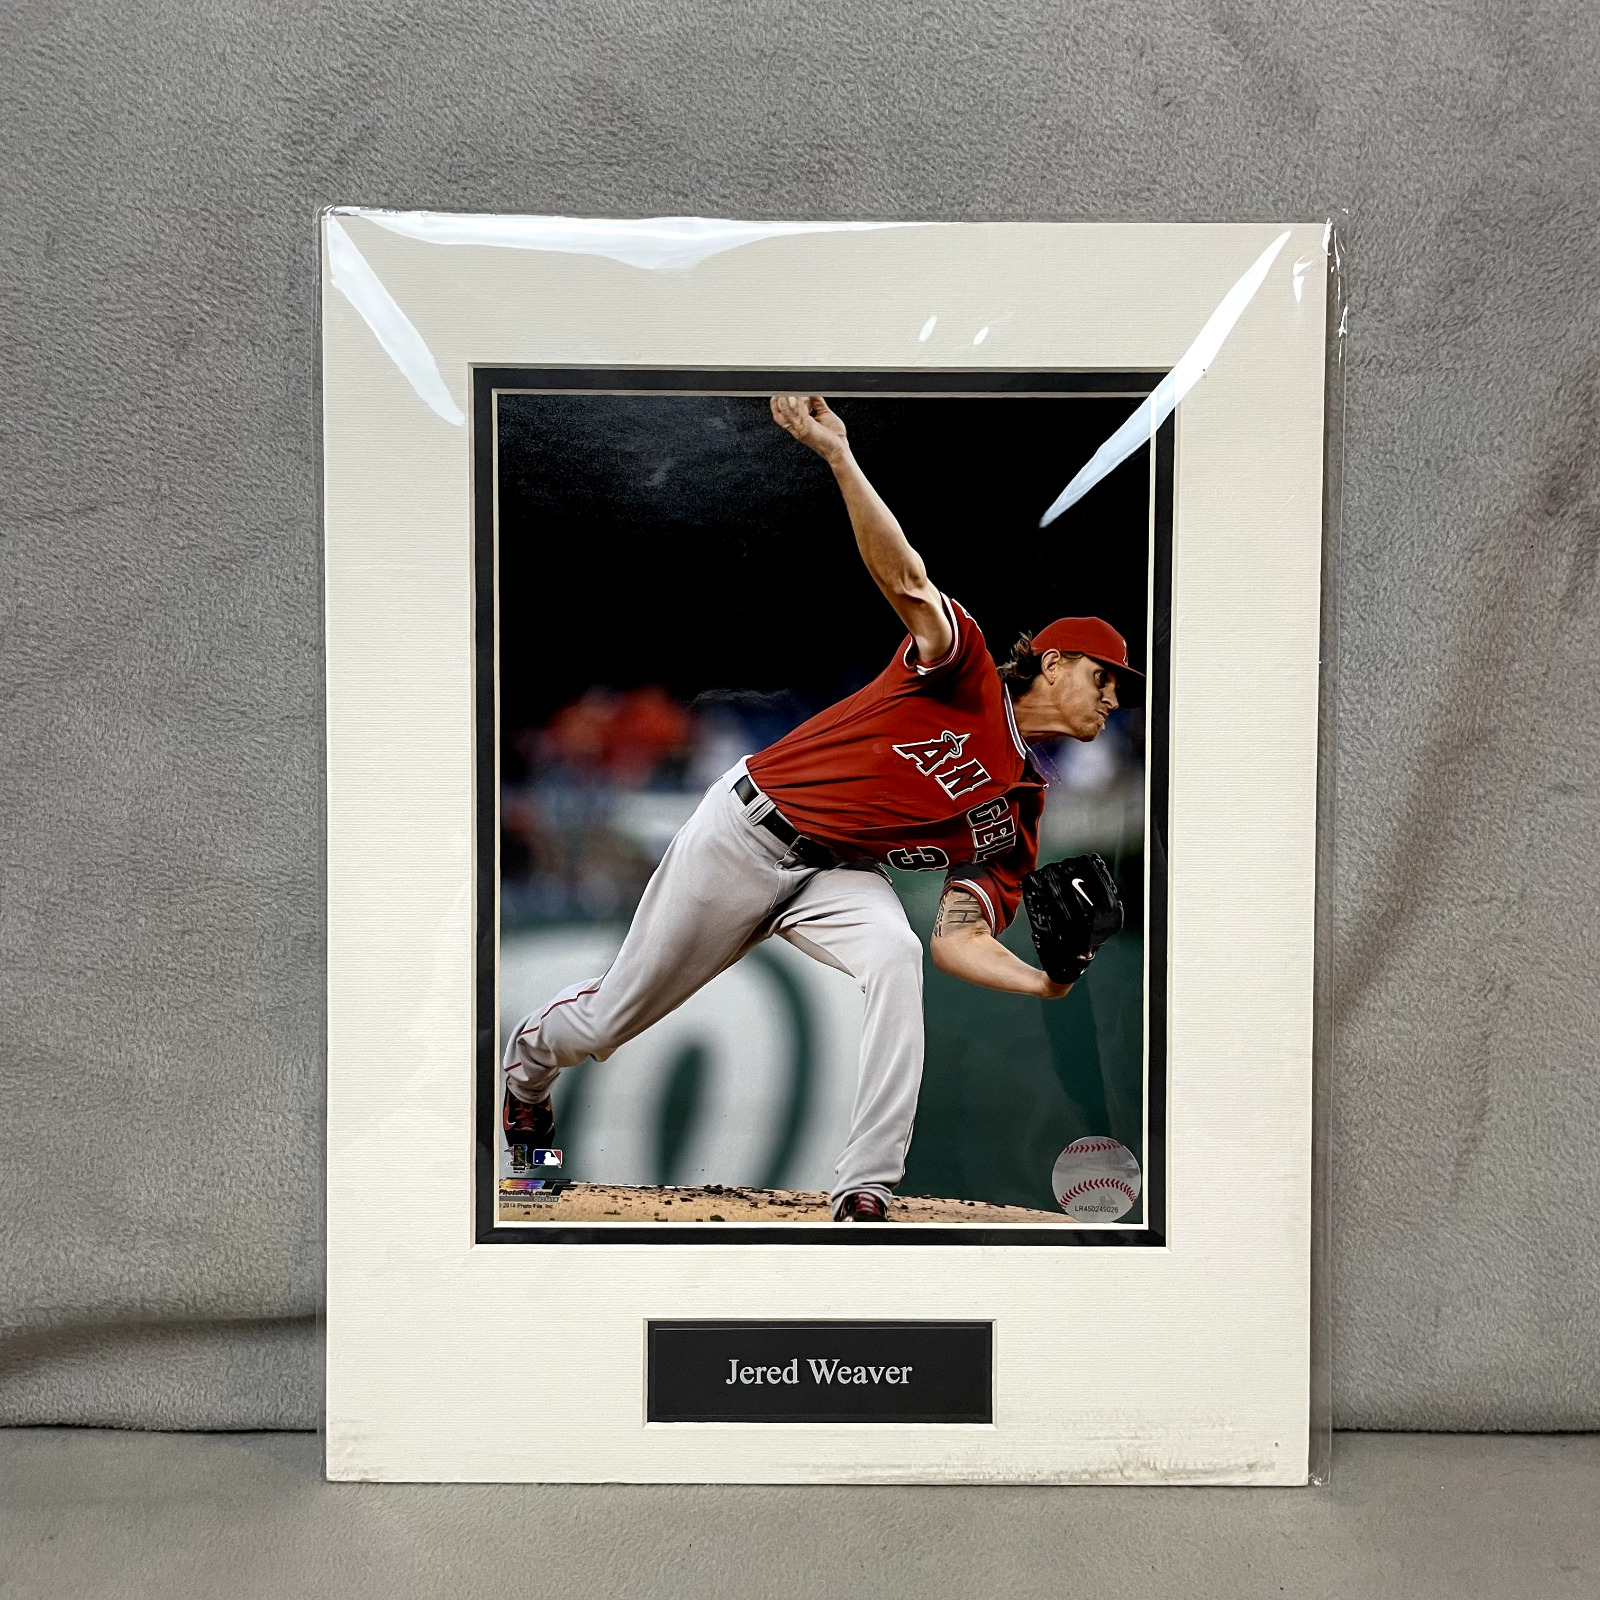 Jered Weaver Official MLB Photo 2014 Angeles of Anaheim LR450249026